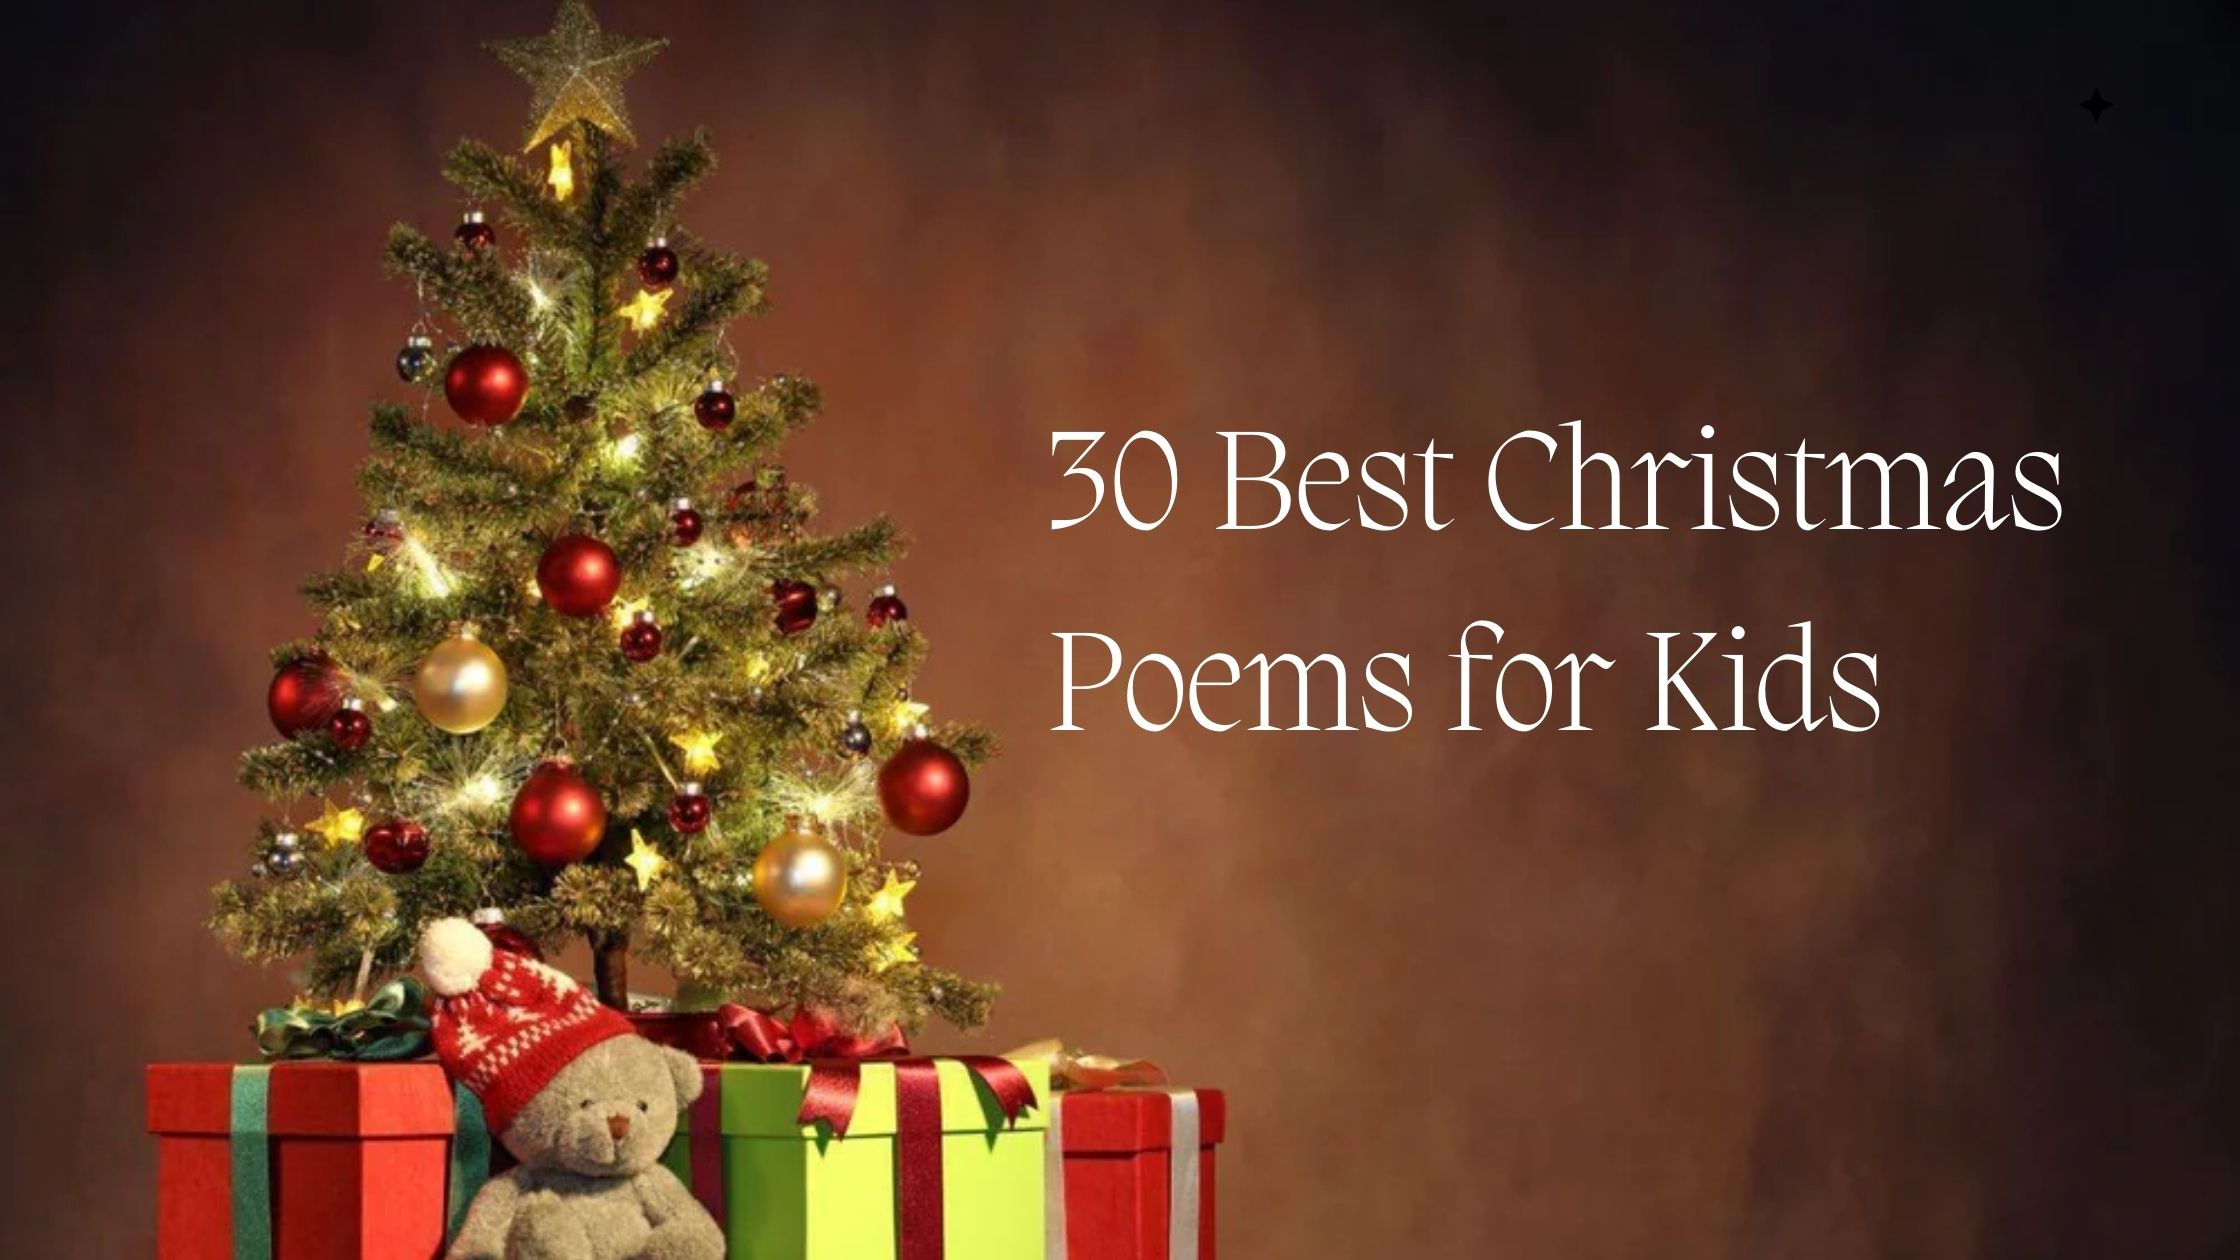 30 Best Christmas Poems for Kids - Merry Christmas Poems